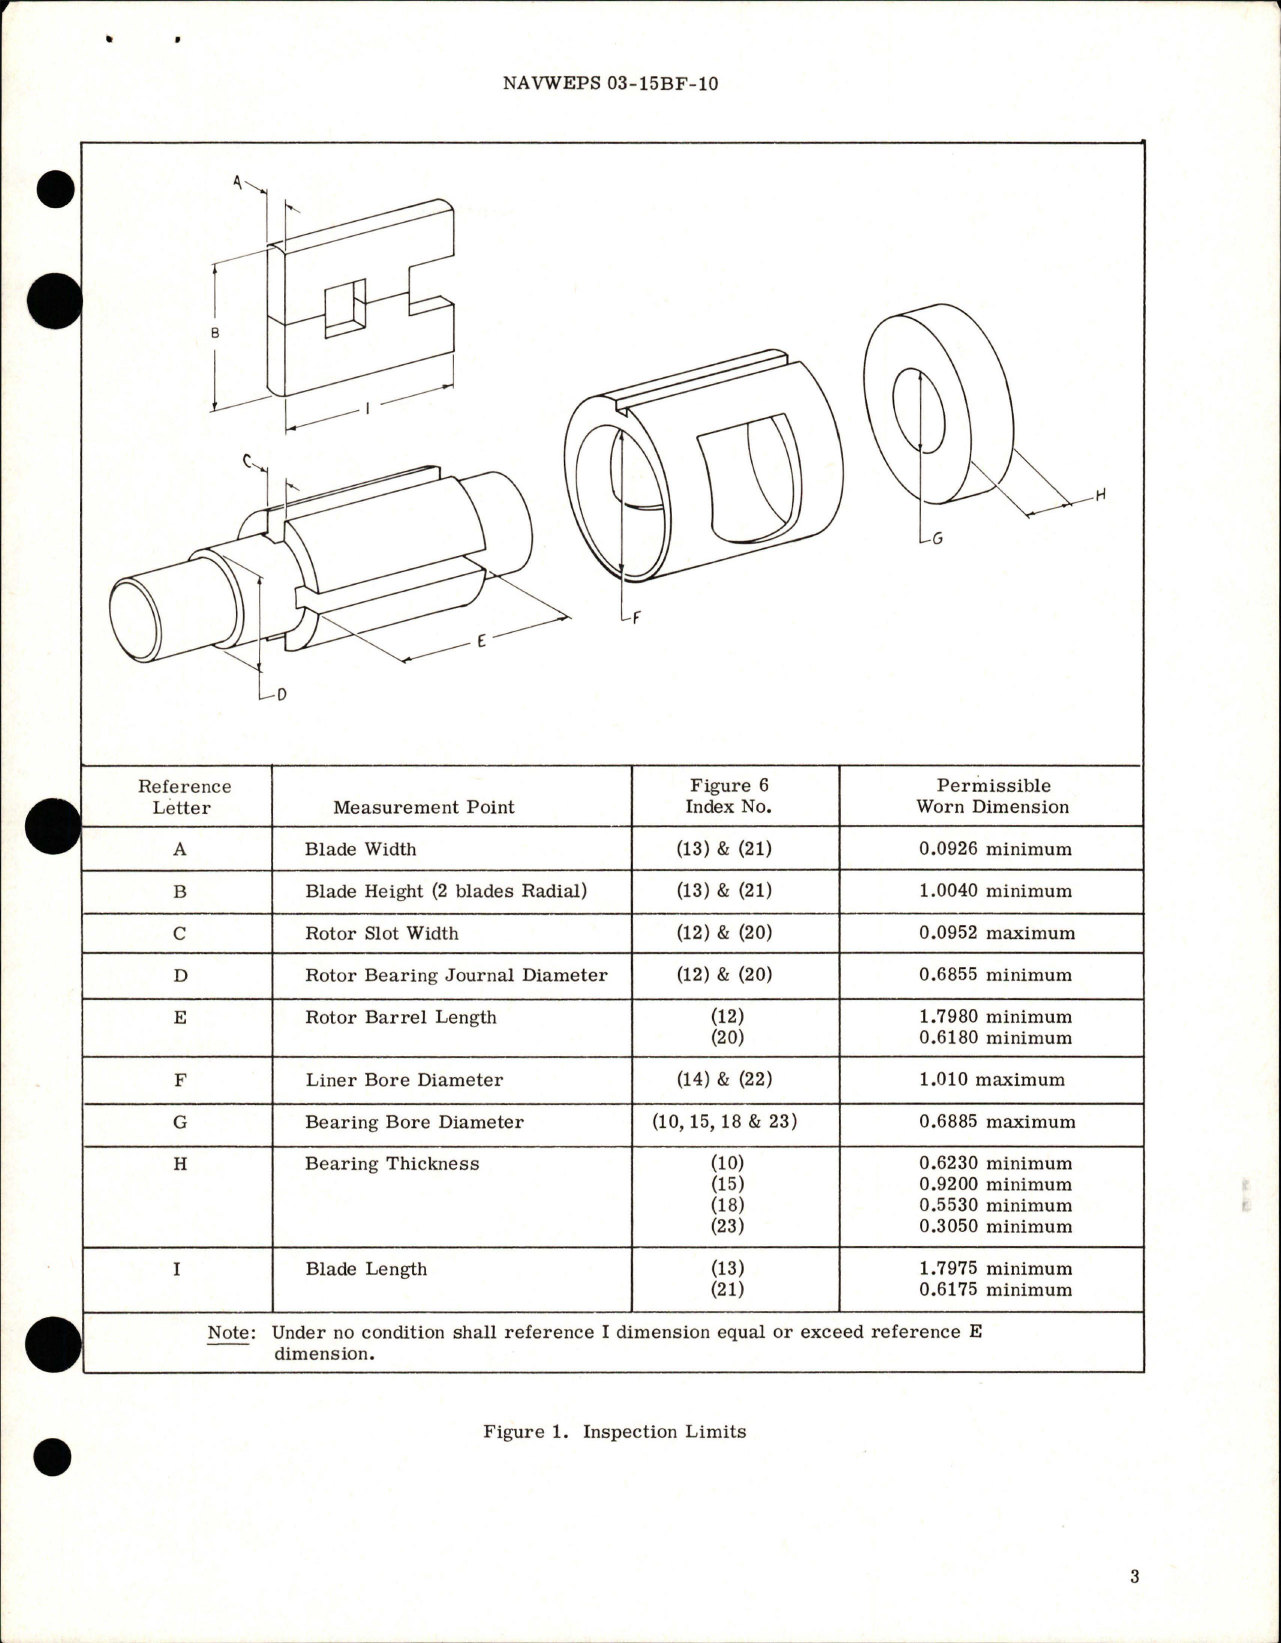 Sample page 5 from AirCorps Library document: Overhaul Instructions with Parts Breakdown for Main Lube Pump - LSI Model RR16730A and RR16730D